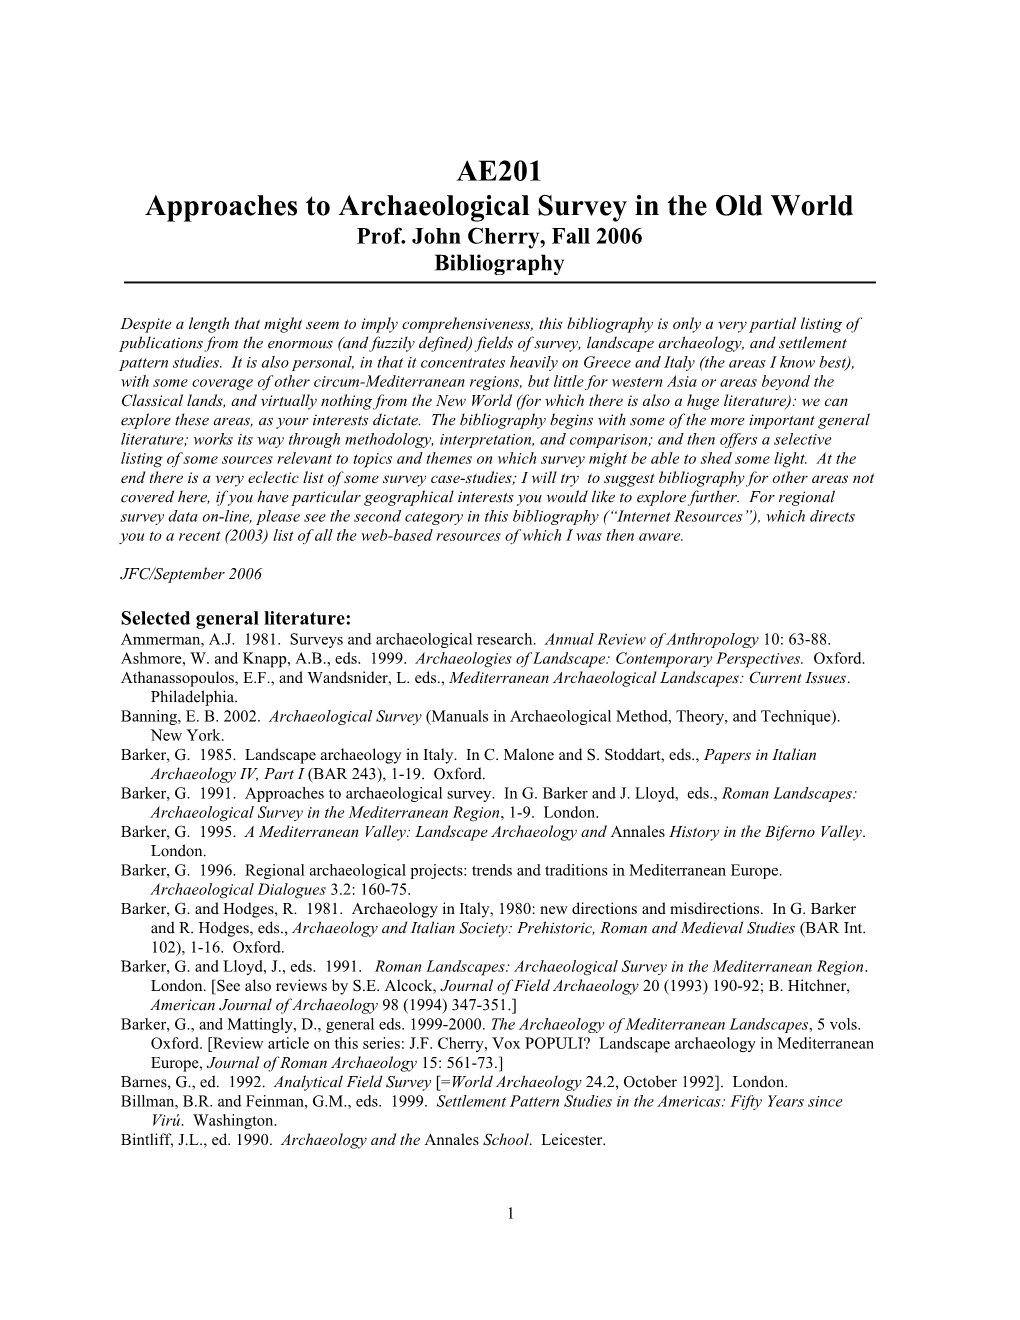 Approaches to Archaeological Survey in the Old World